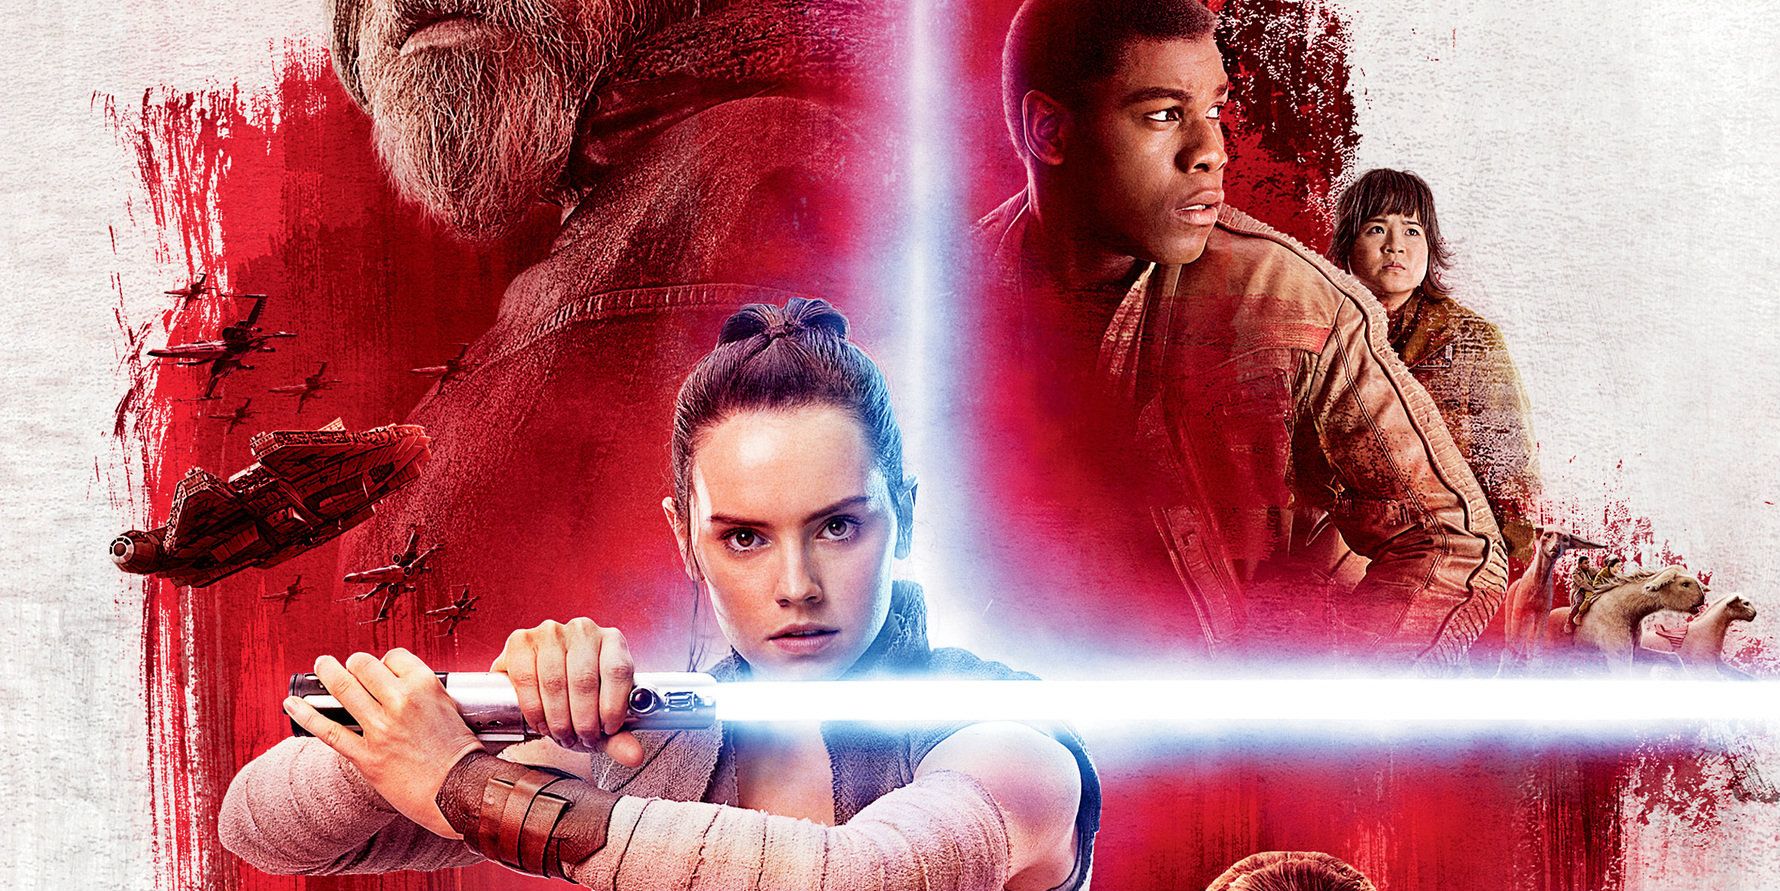 How Can 'Star Wars' Recover From Rave Reviews, Huge Grosses For 'Last Jedi'?